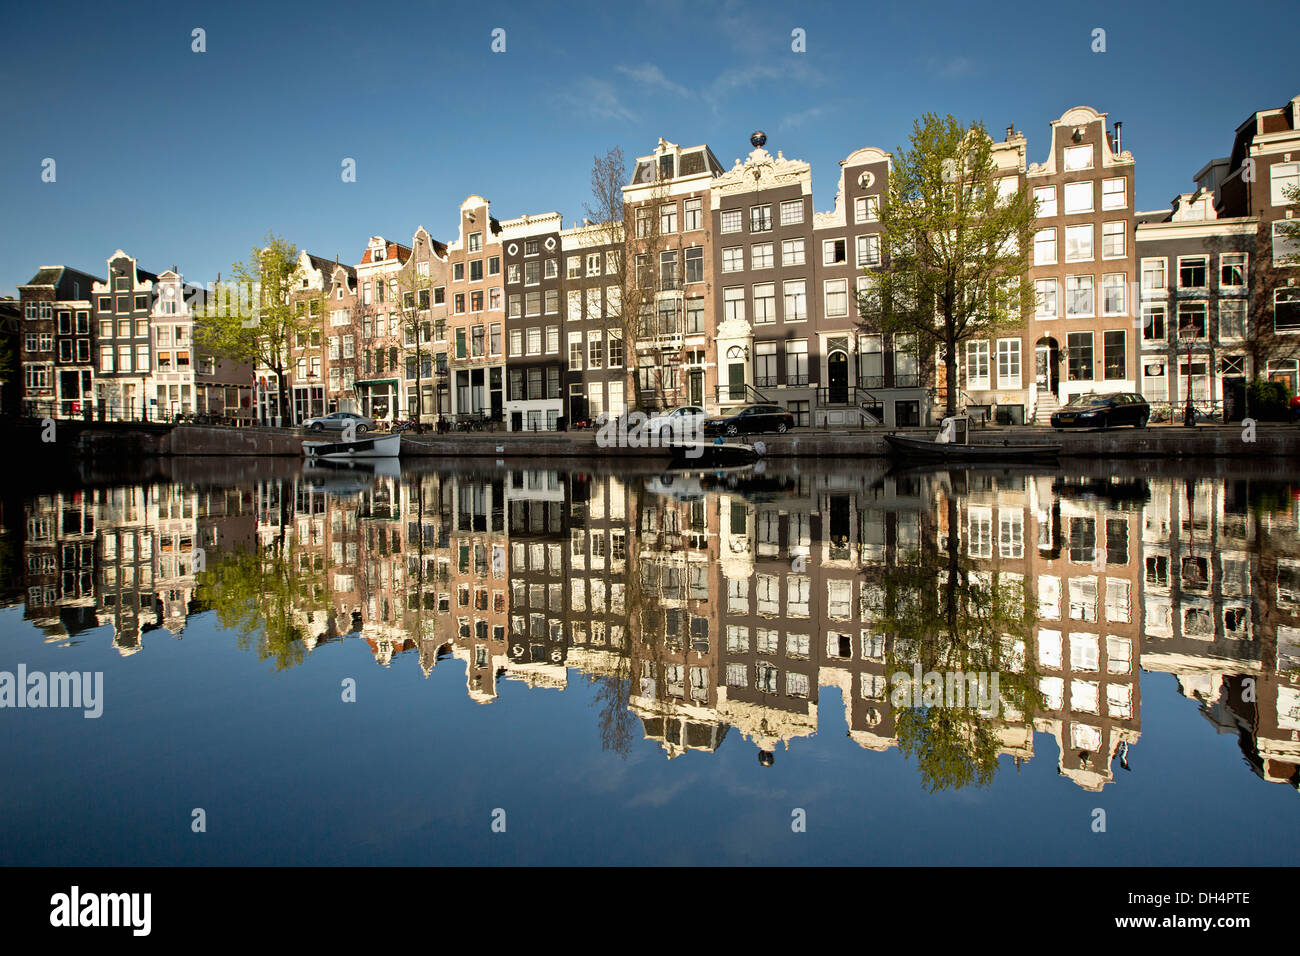 The Netherlands, Amsterdam, Reflection of Canalside houses and houseboats at canal called Singel. Unesco World Heritage Site. Stock Photo